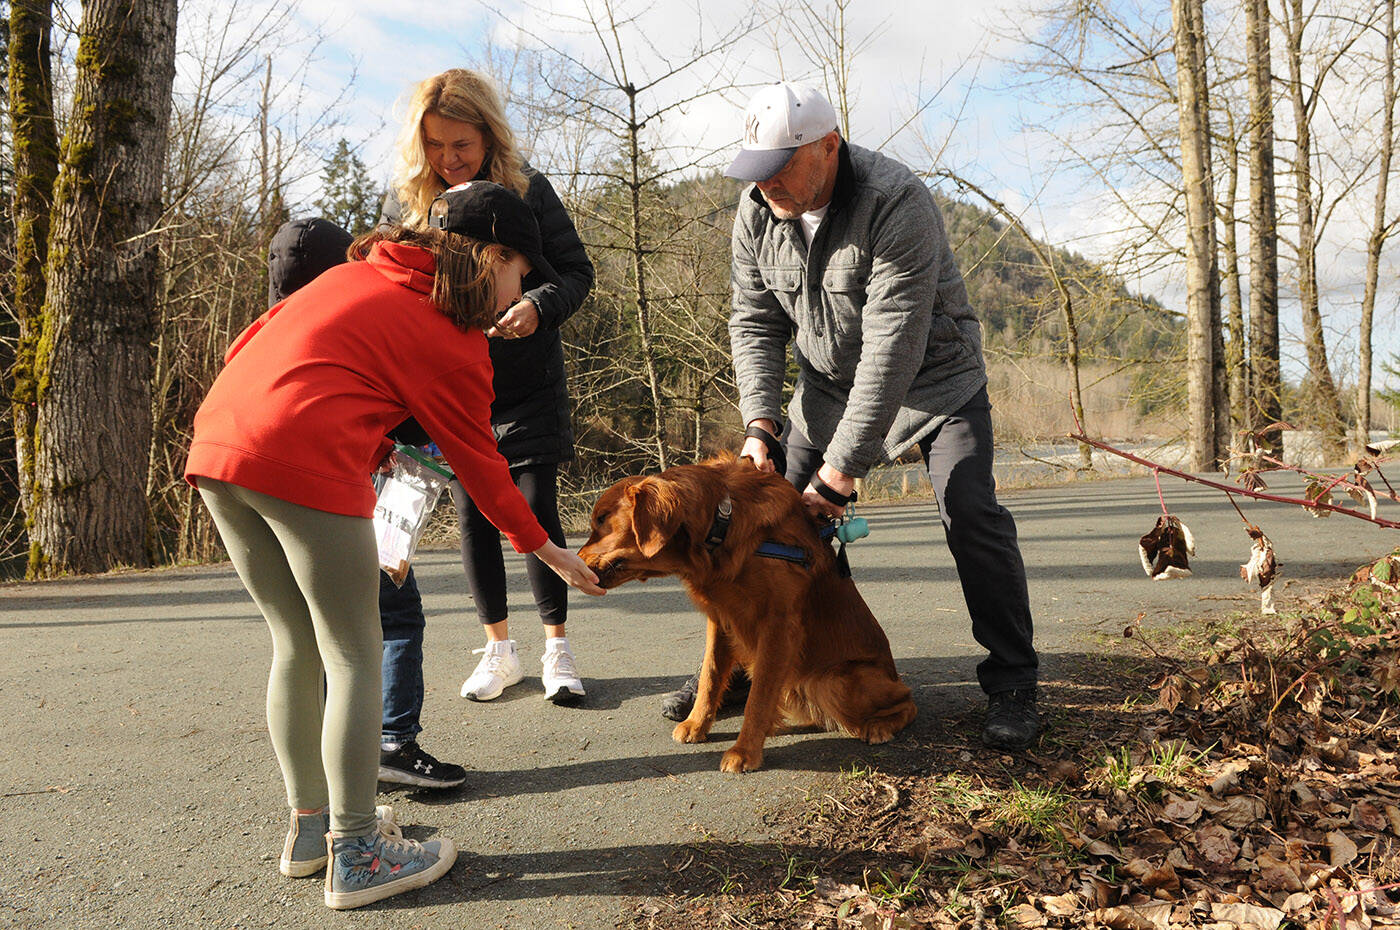 Jade Pennock gives a dog a treat near Vedder Park during Watson Elementary’s Kindness Project on Wednesday, March 15, 2023. (Jenna Hauck/ Chilliwack Progress)